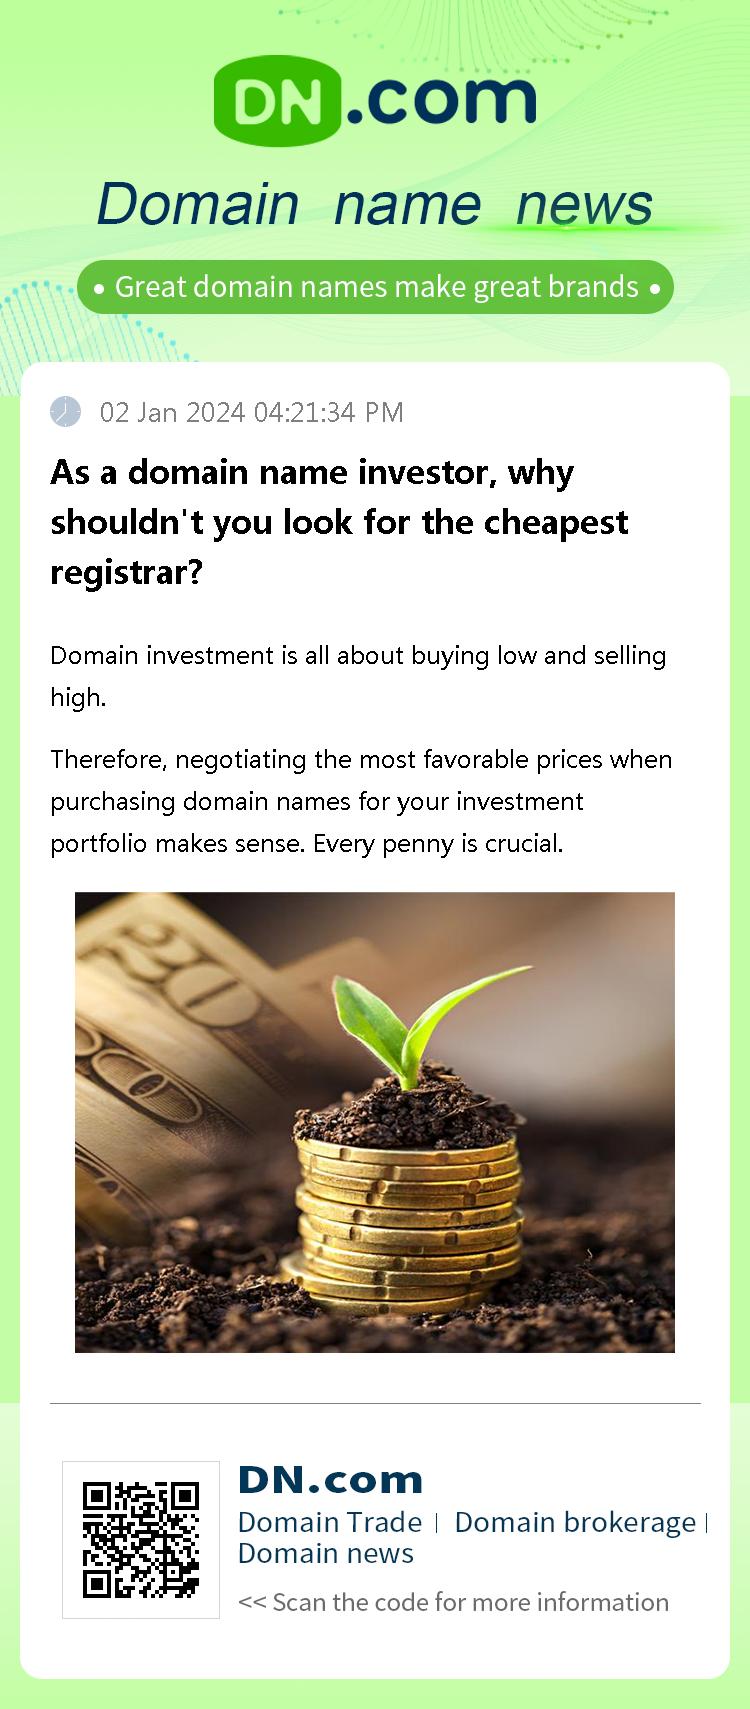 As a domain name investor, why shouldn't you look for the cheapest registrar?